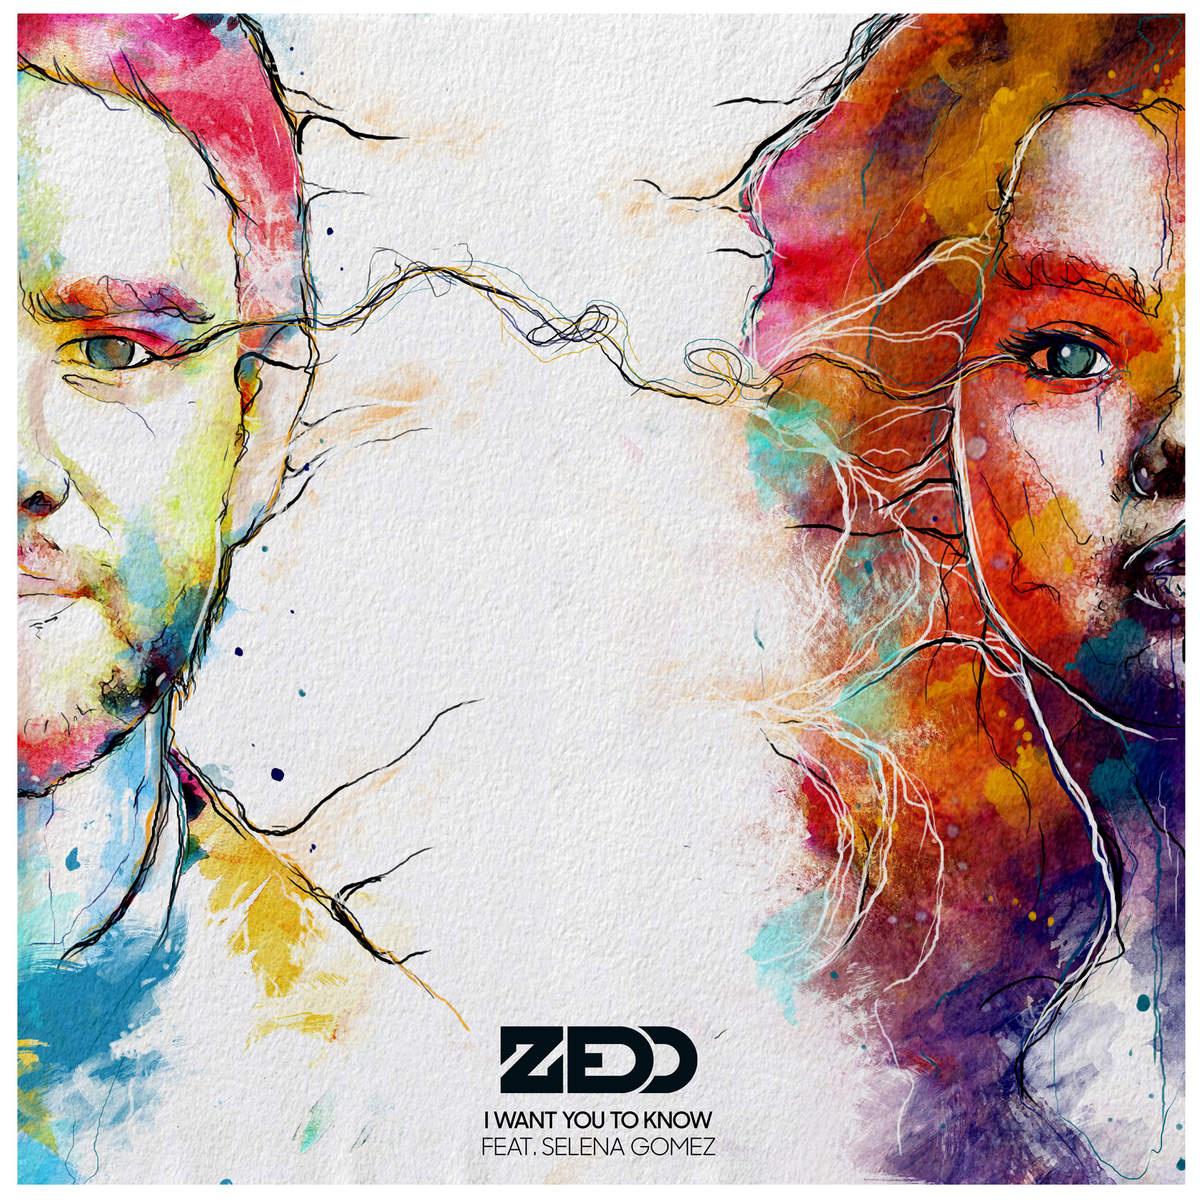 I Want You to Know歌词 歌手Zedd / Selena Gomez-专辑I Want You to Know-单曲《I Want You to Know》LRC歌词下载